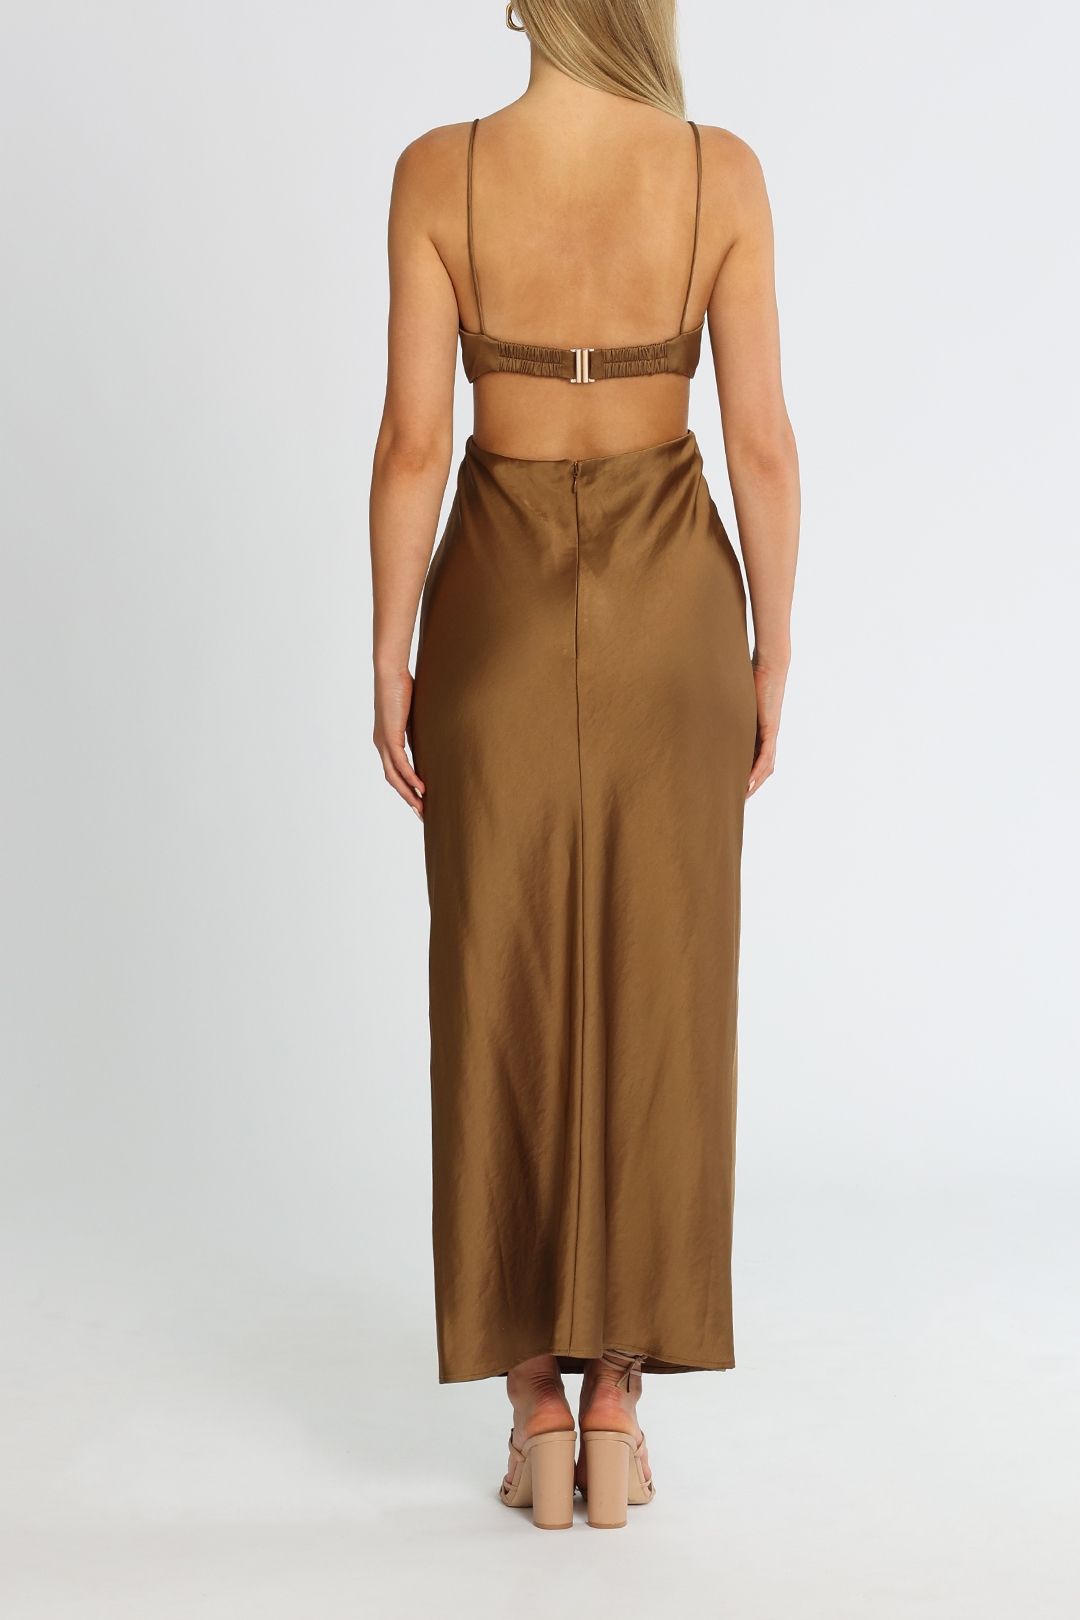 Significant Other Jacy Dress Dark Gold Midi